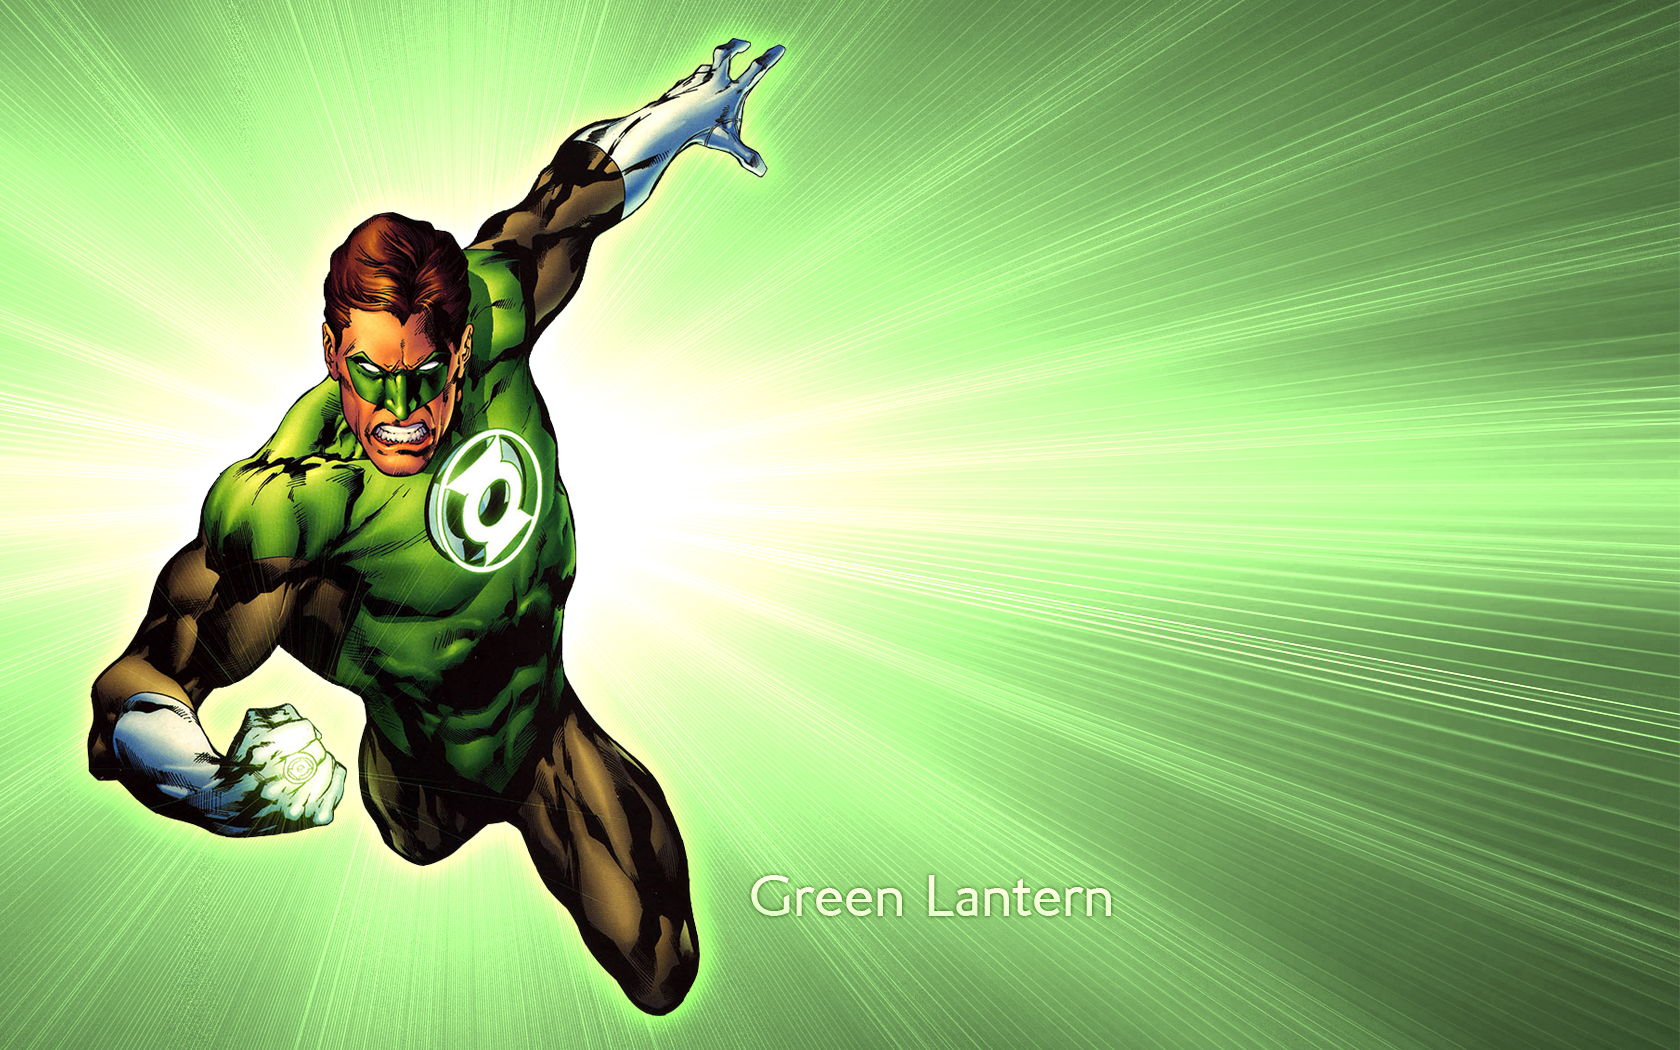 Check this out our new Green Lantern wallpaper DC Comics wallpapers